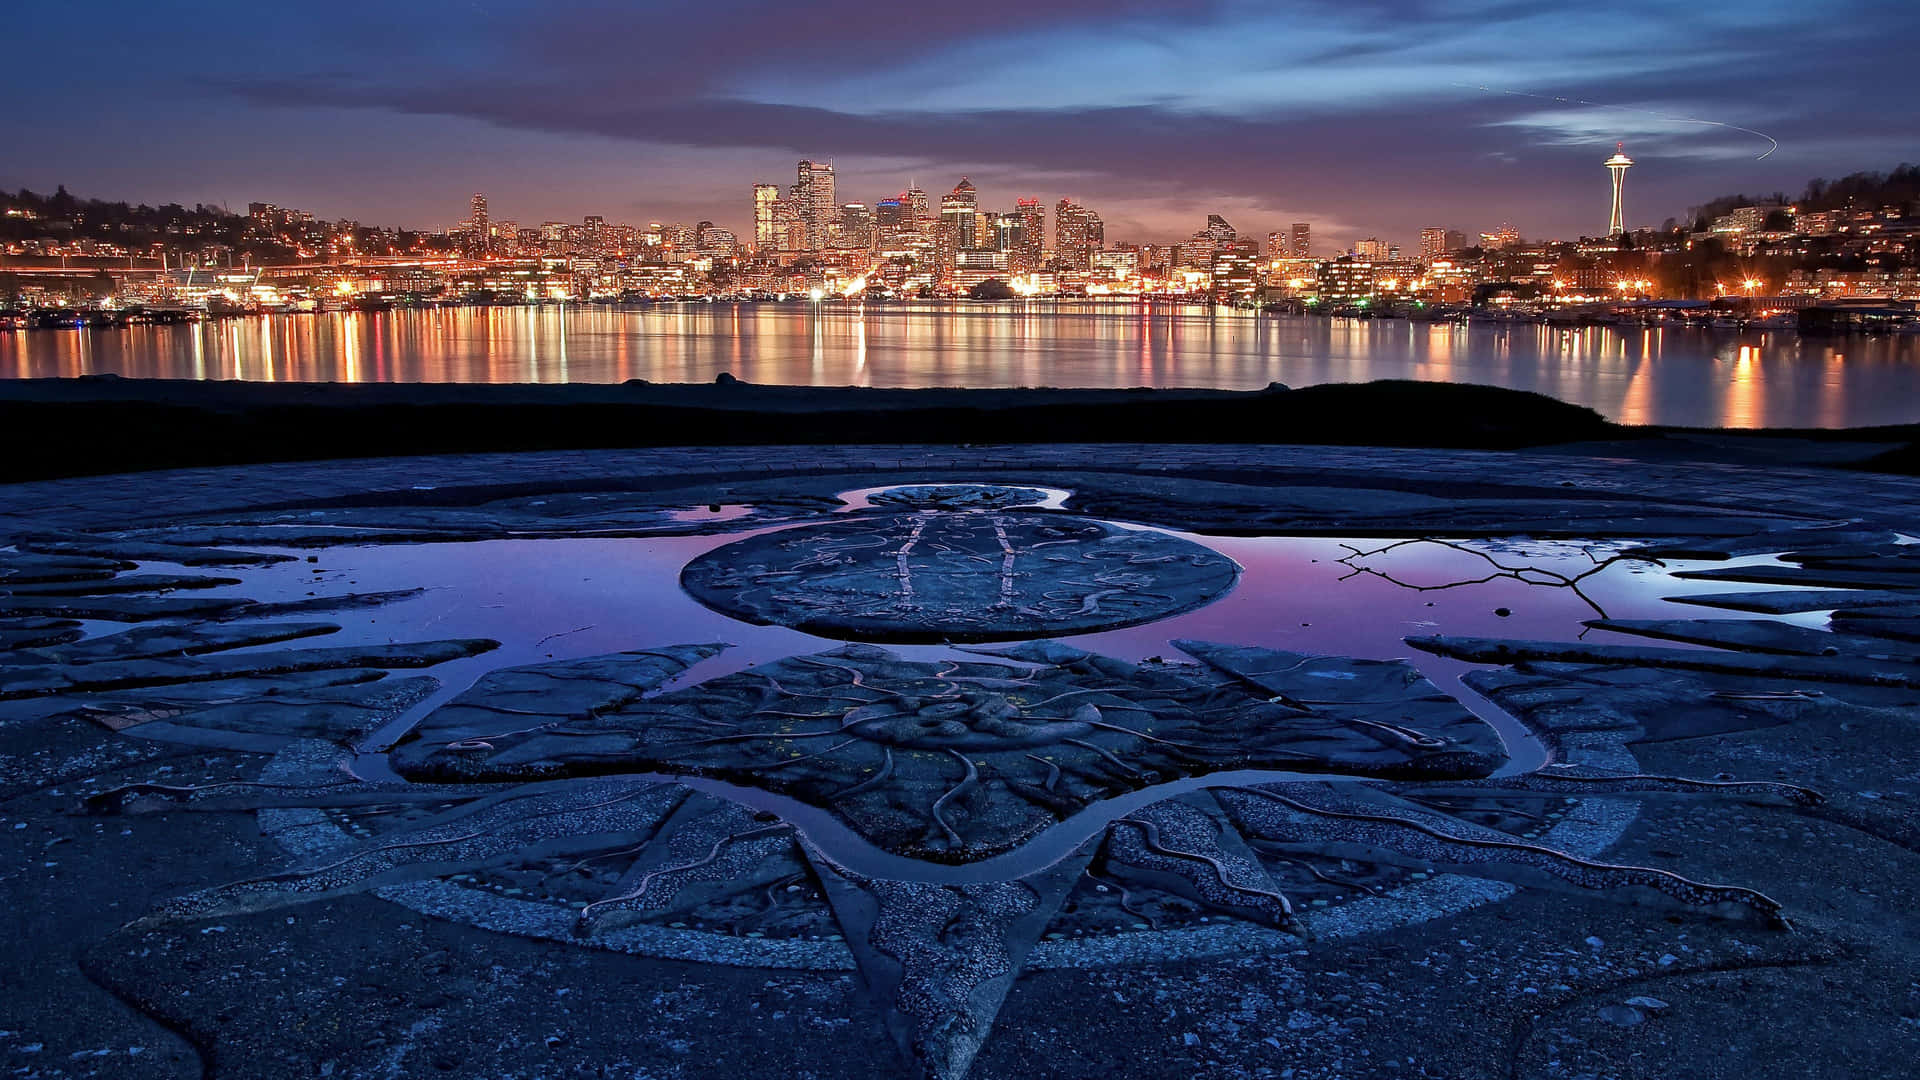 "Skyline of Seattle with Mount Rainier in the background." Wallpaper